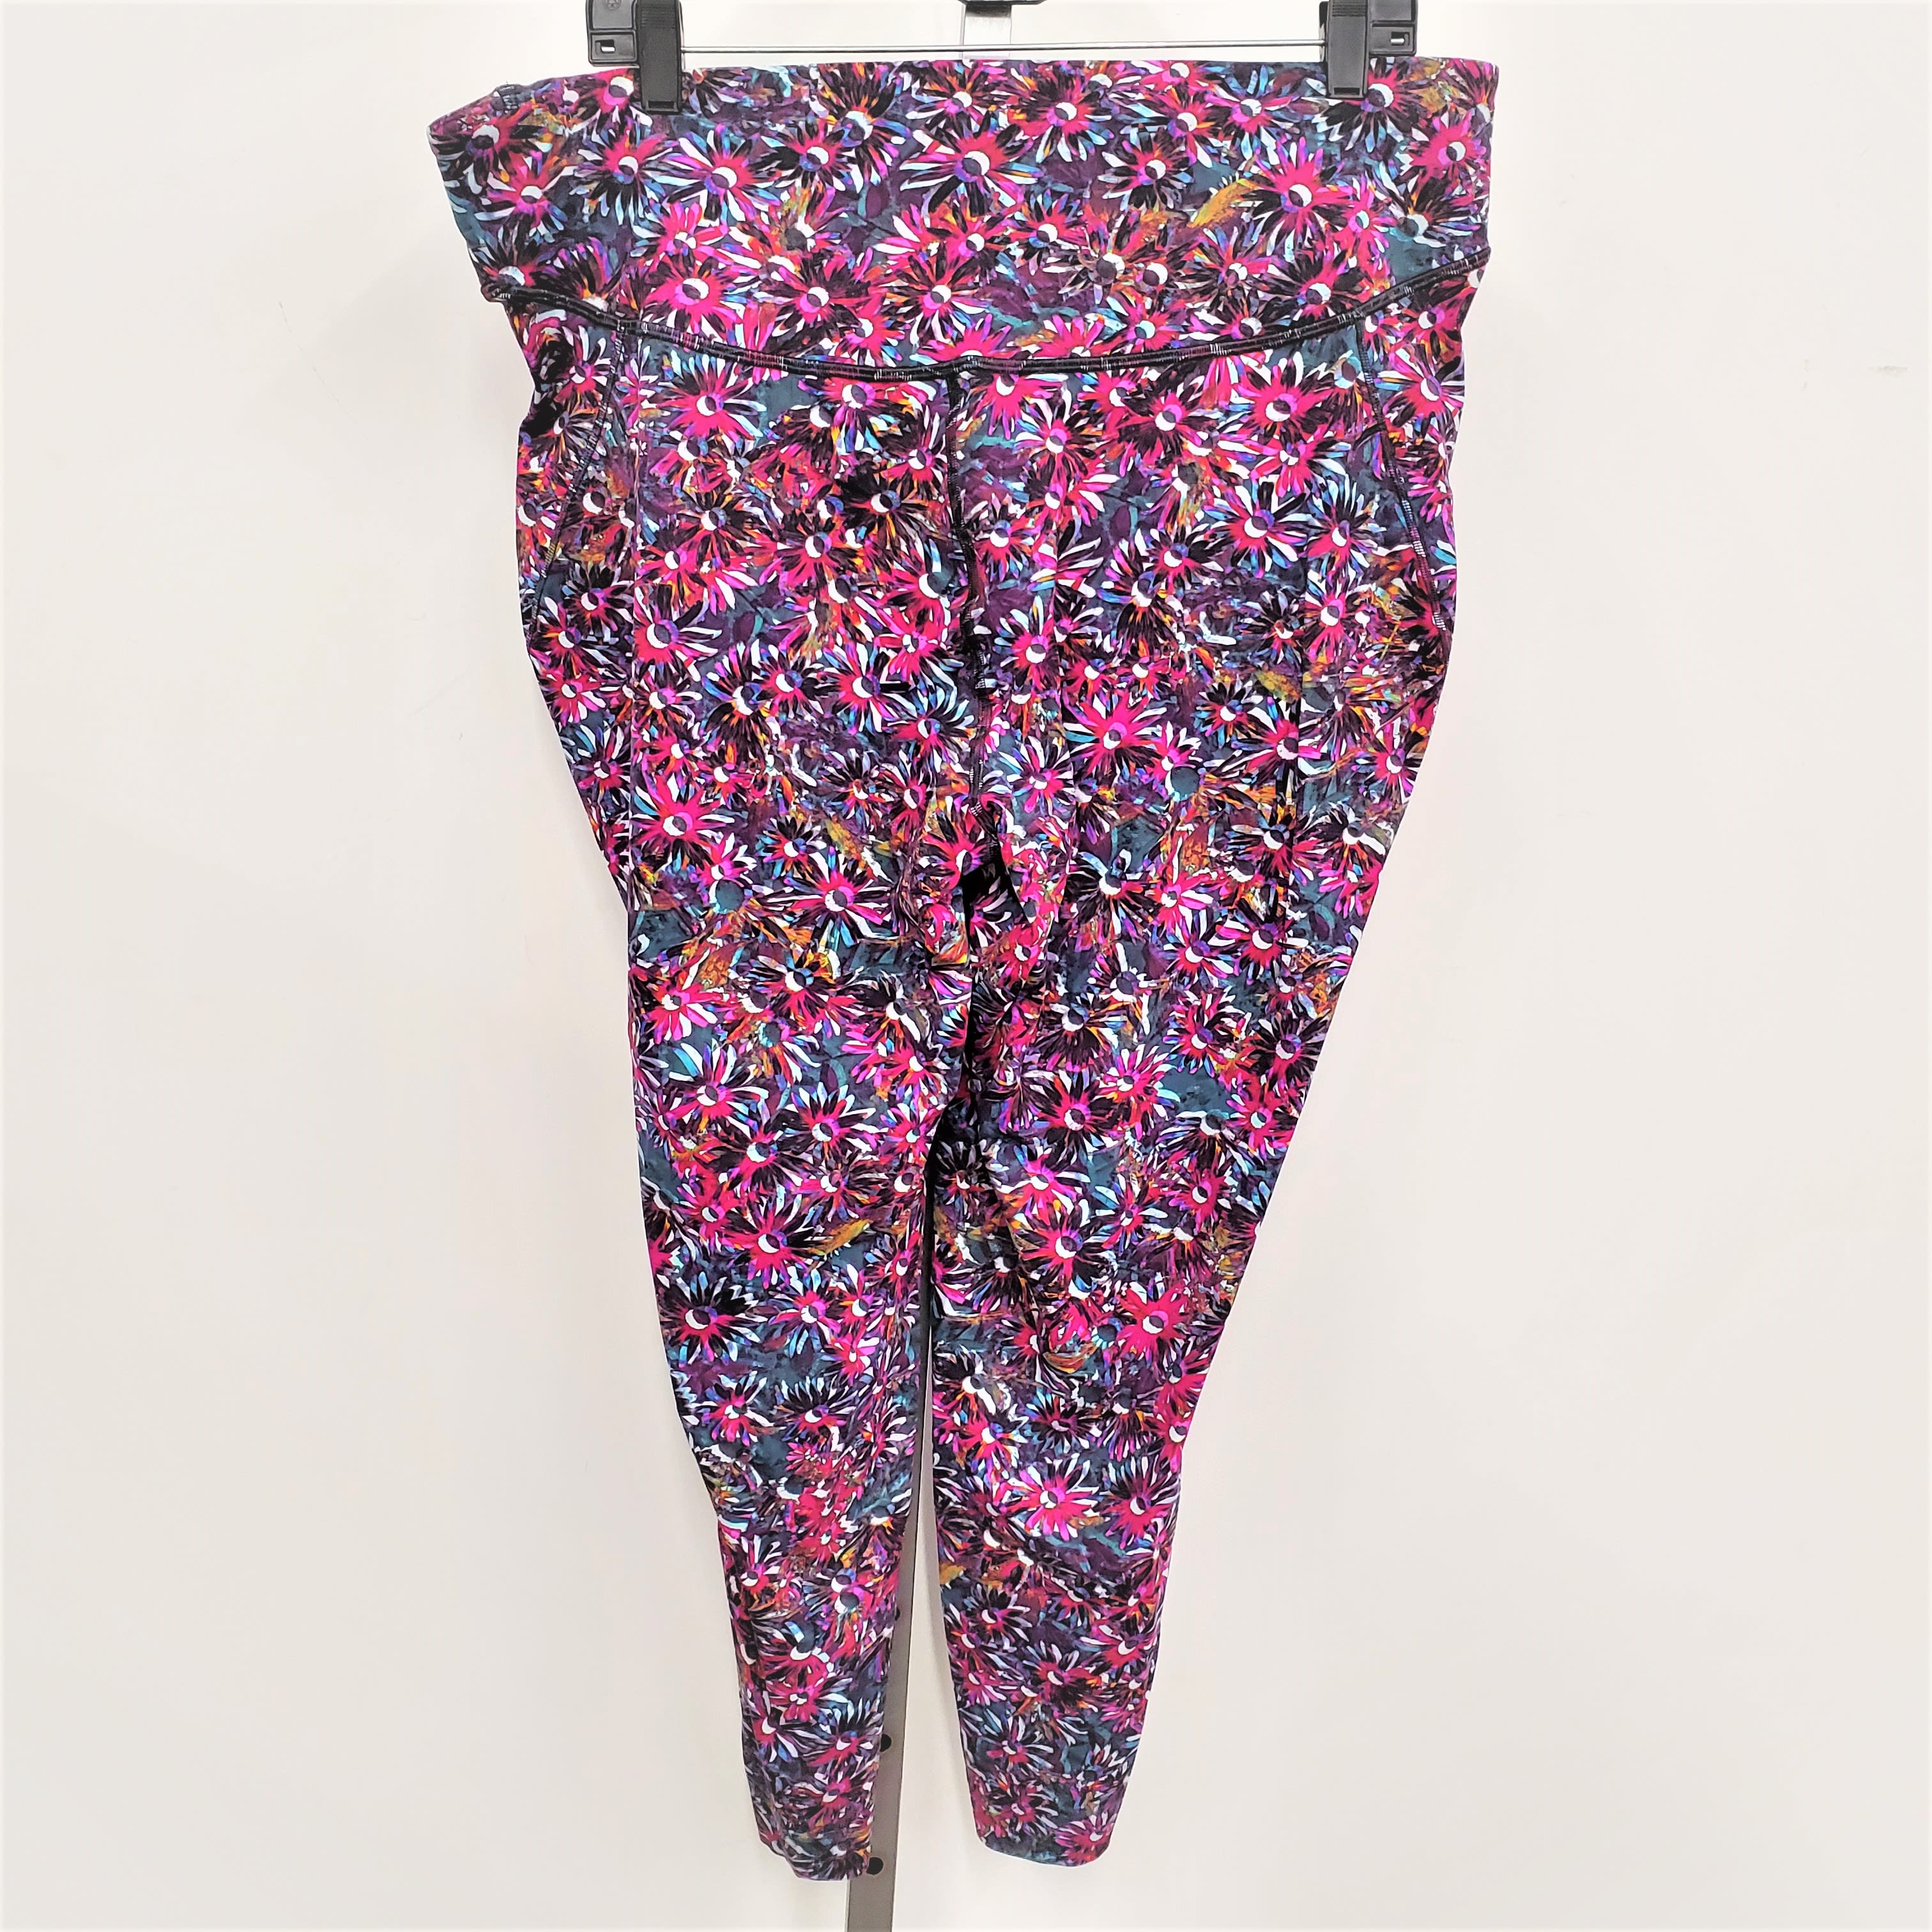 Buy the Lululemon Floral Electric Daisy Print High Rise Athletic